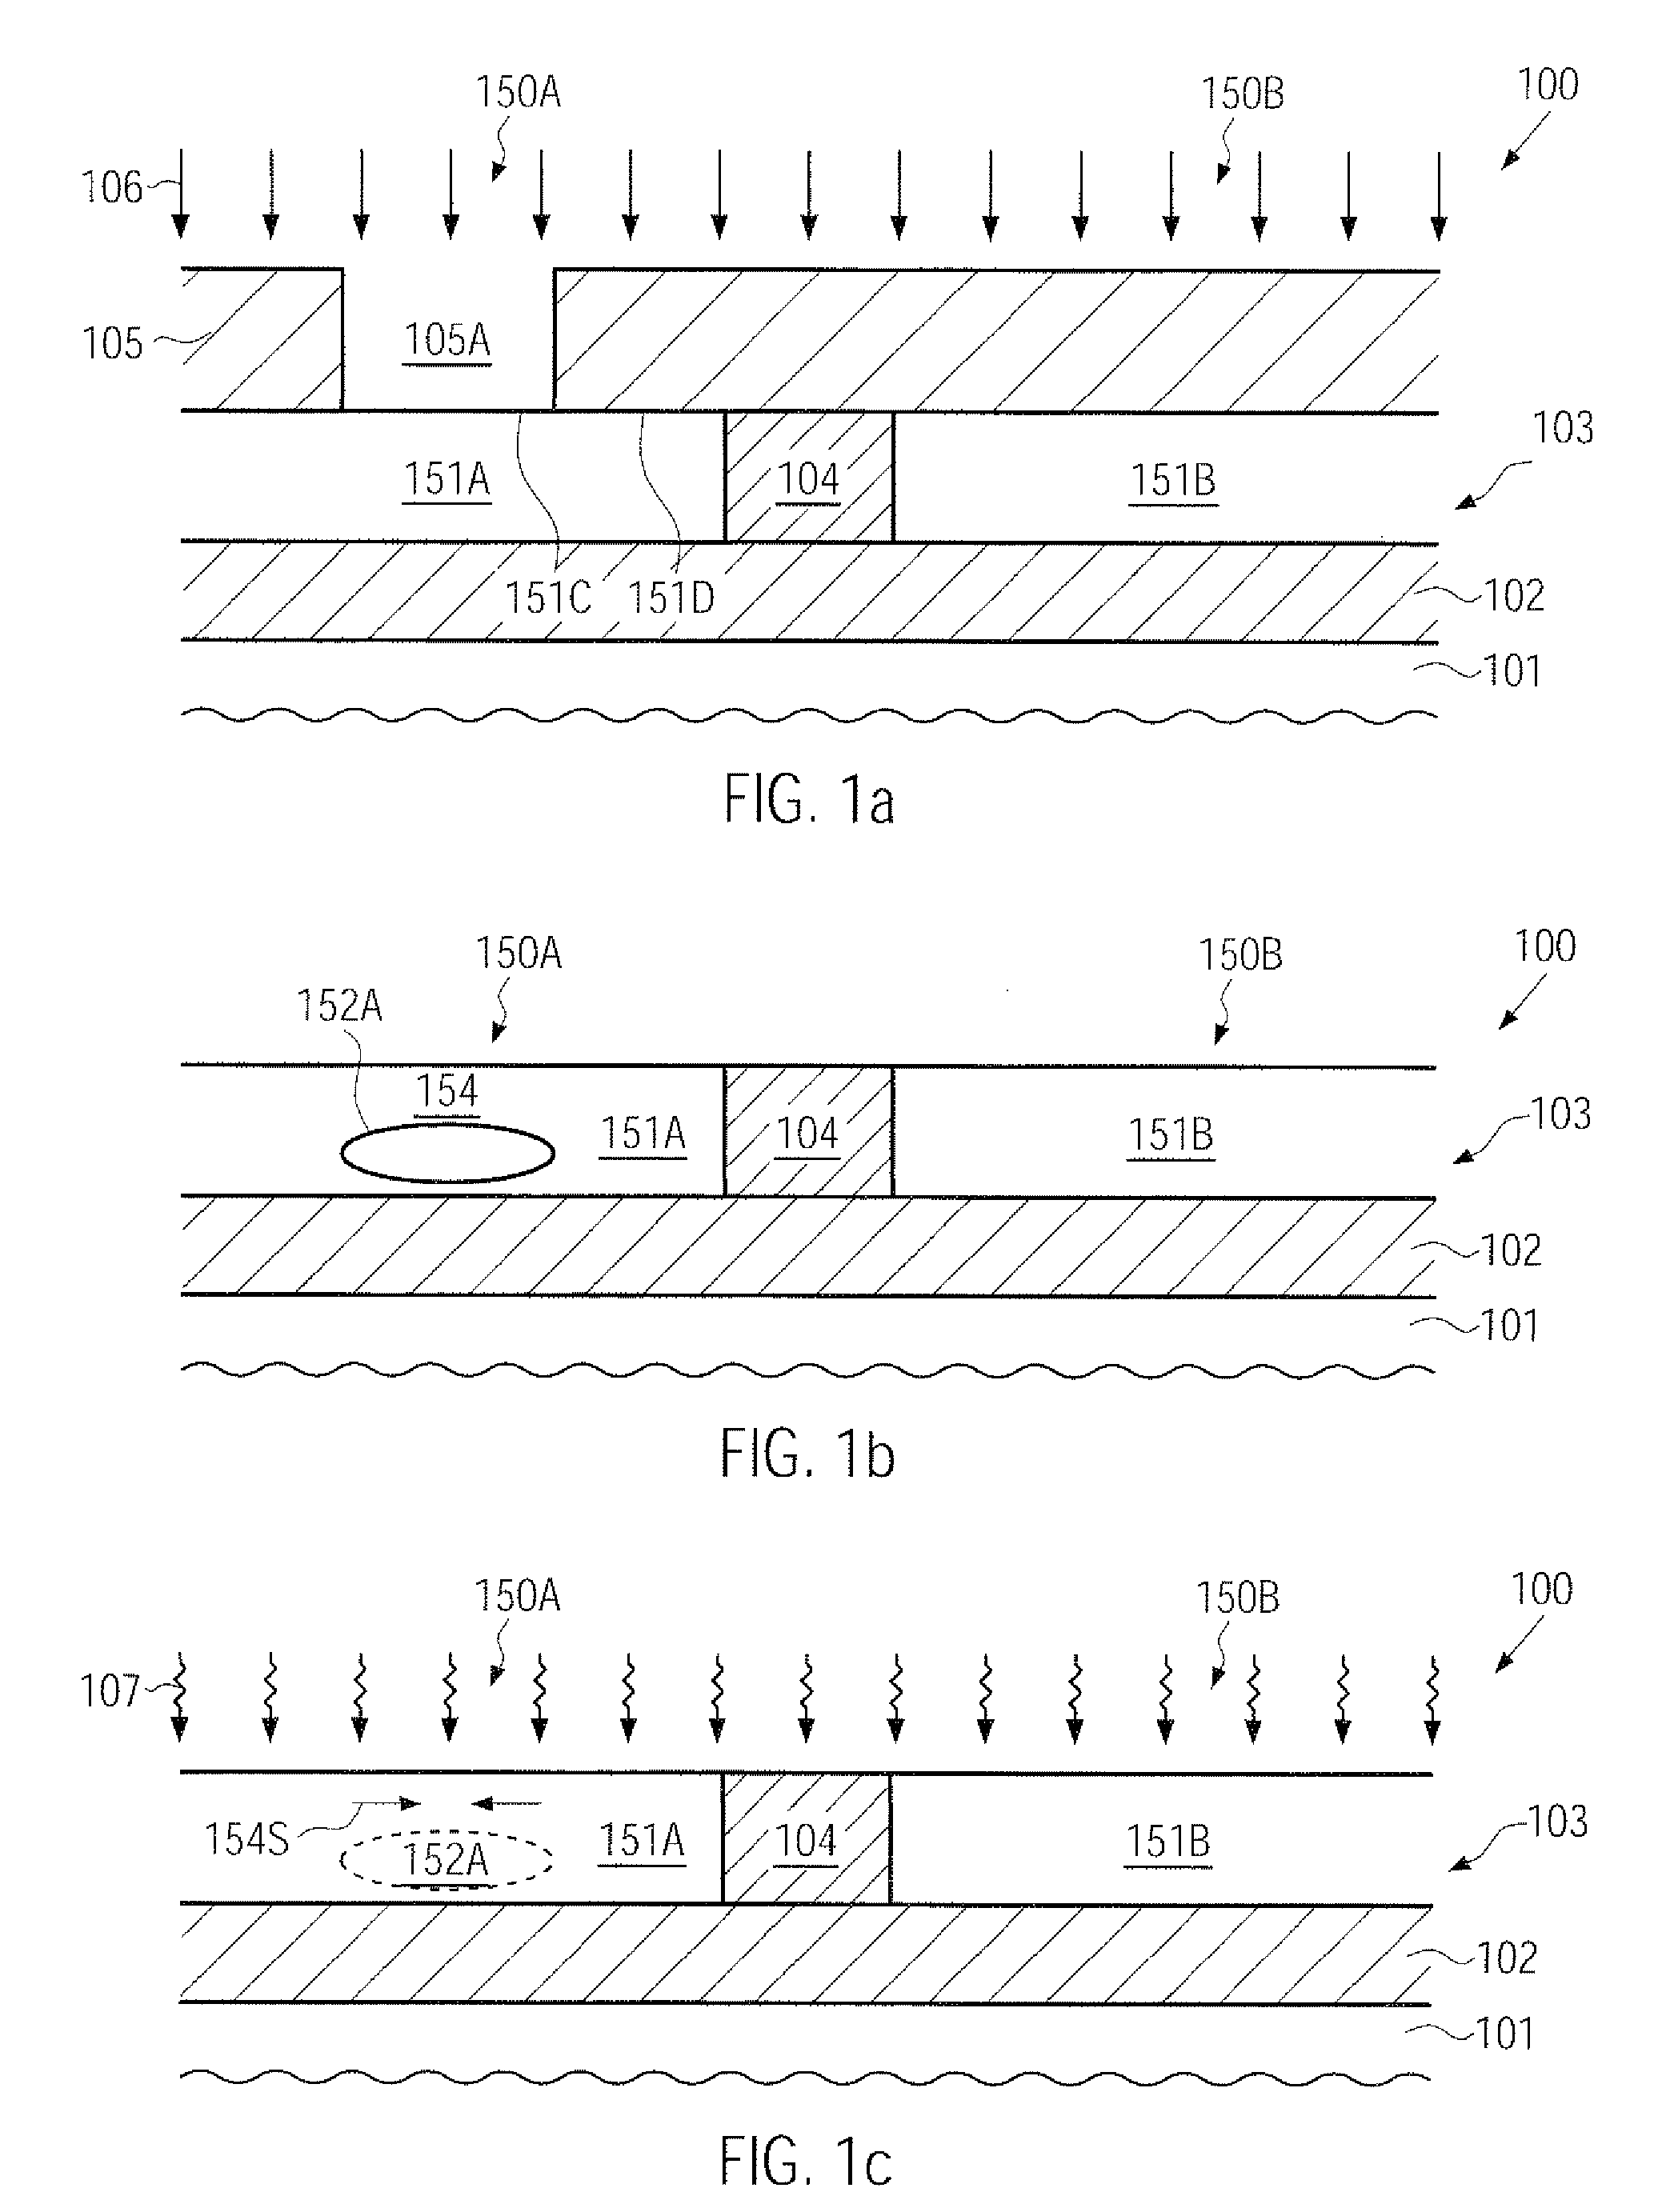 Method of creating a strained channel region in a transistor by deep implantation of strain-inducing species below the channel region